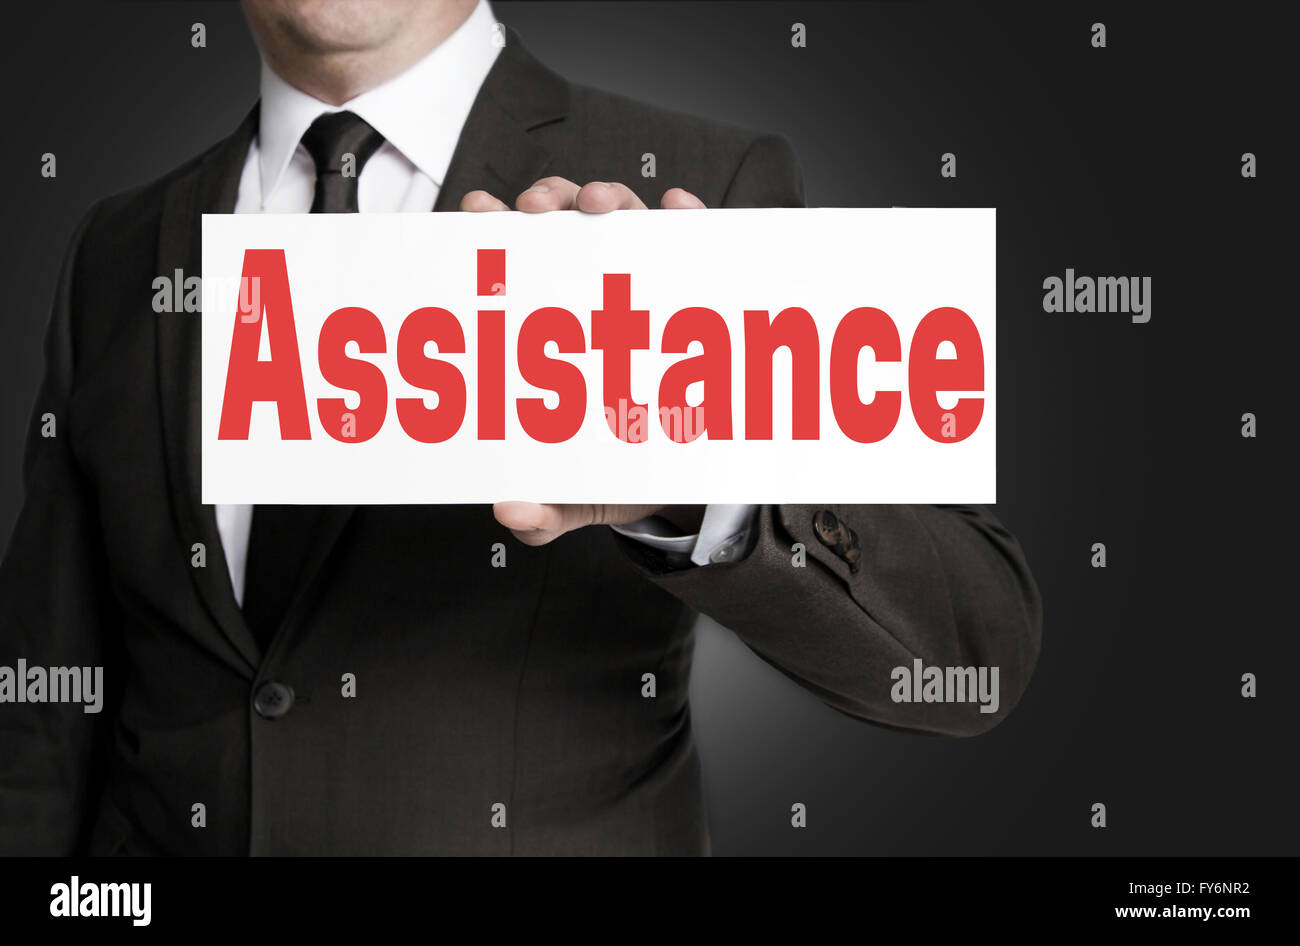 Assistance placard is held by businessman. Stock Photo